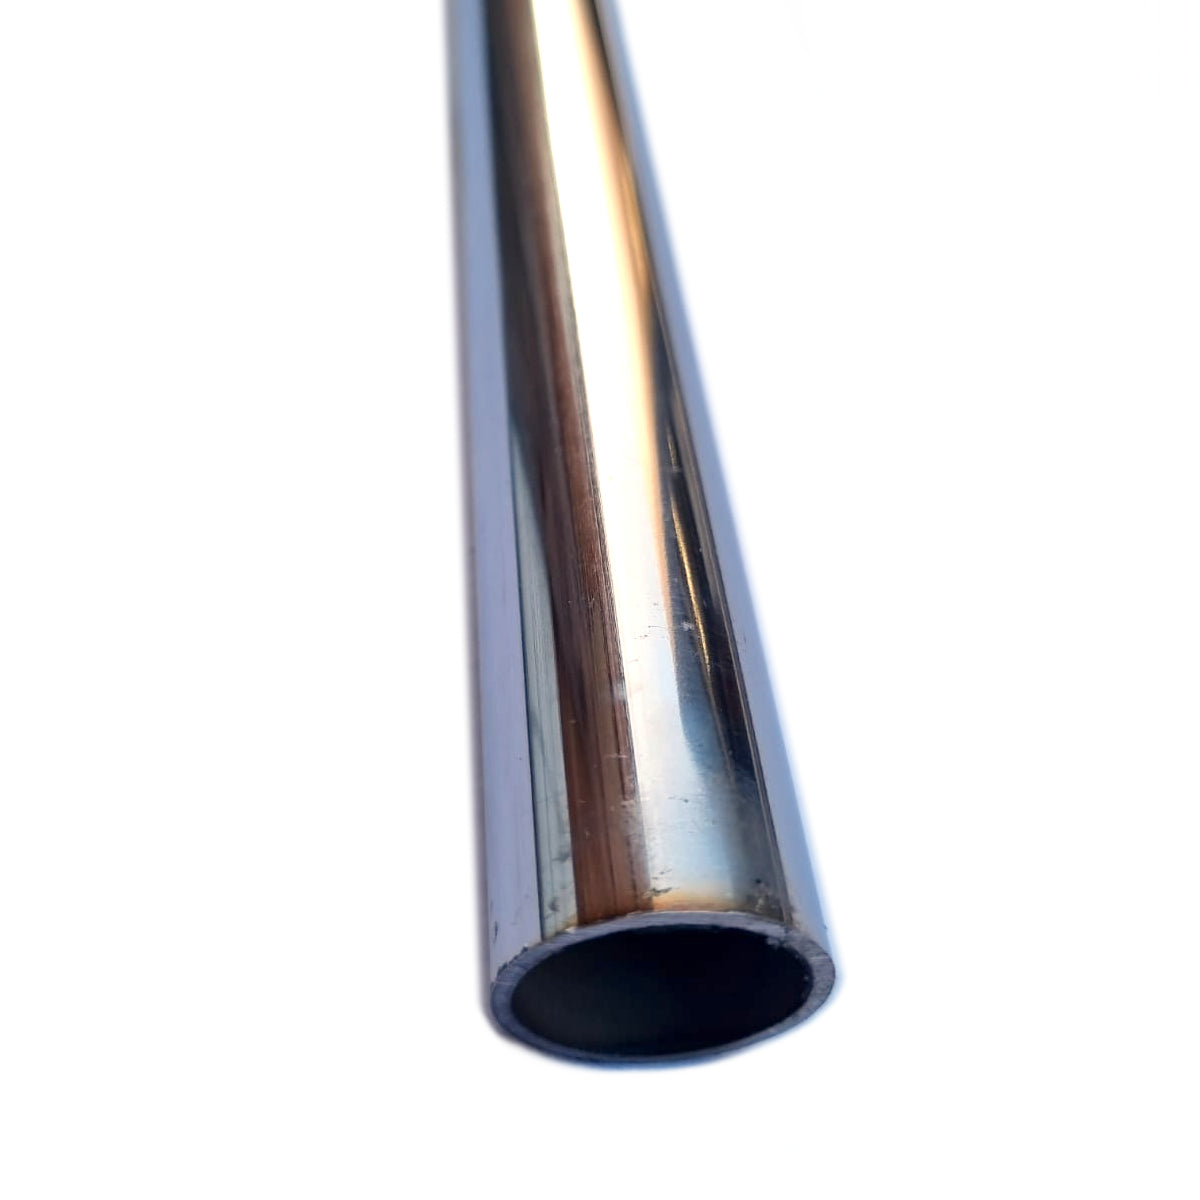 Stainless Steel Tube. Australia wide shipping